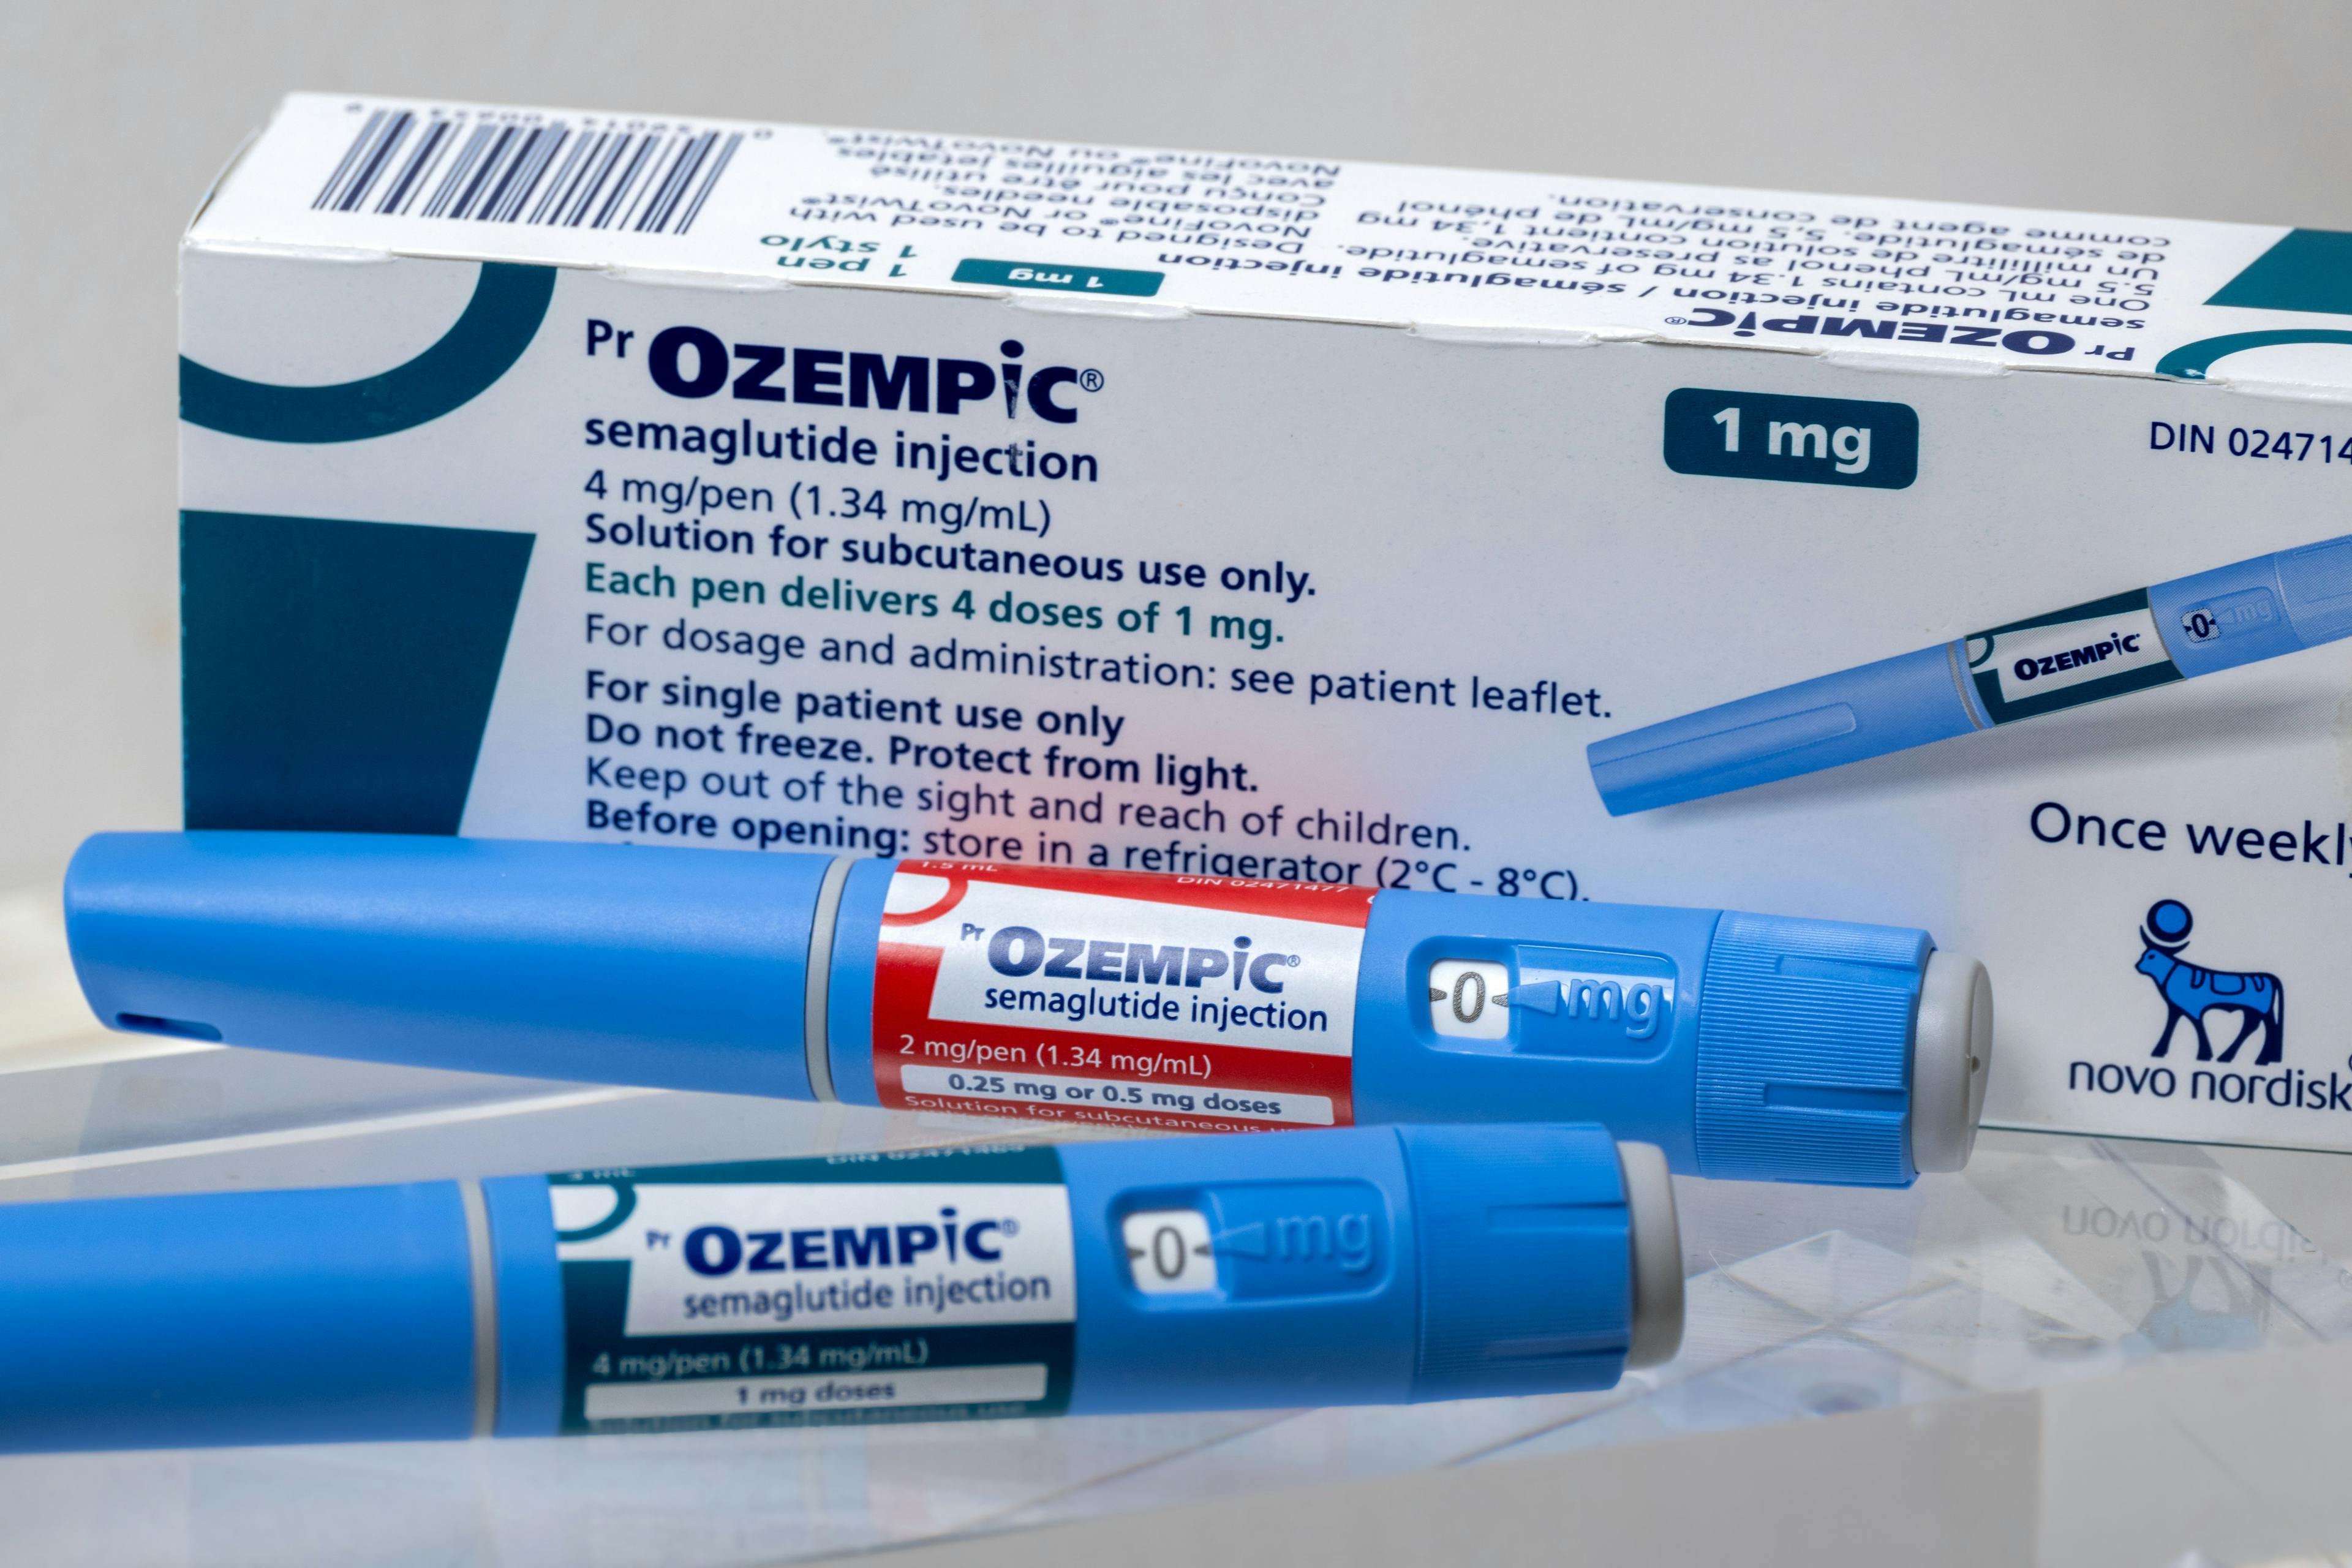 Ozempic injection | Image credit: mbruxelle – stock.adobe.com